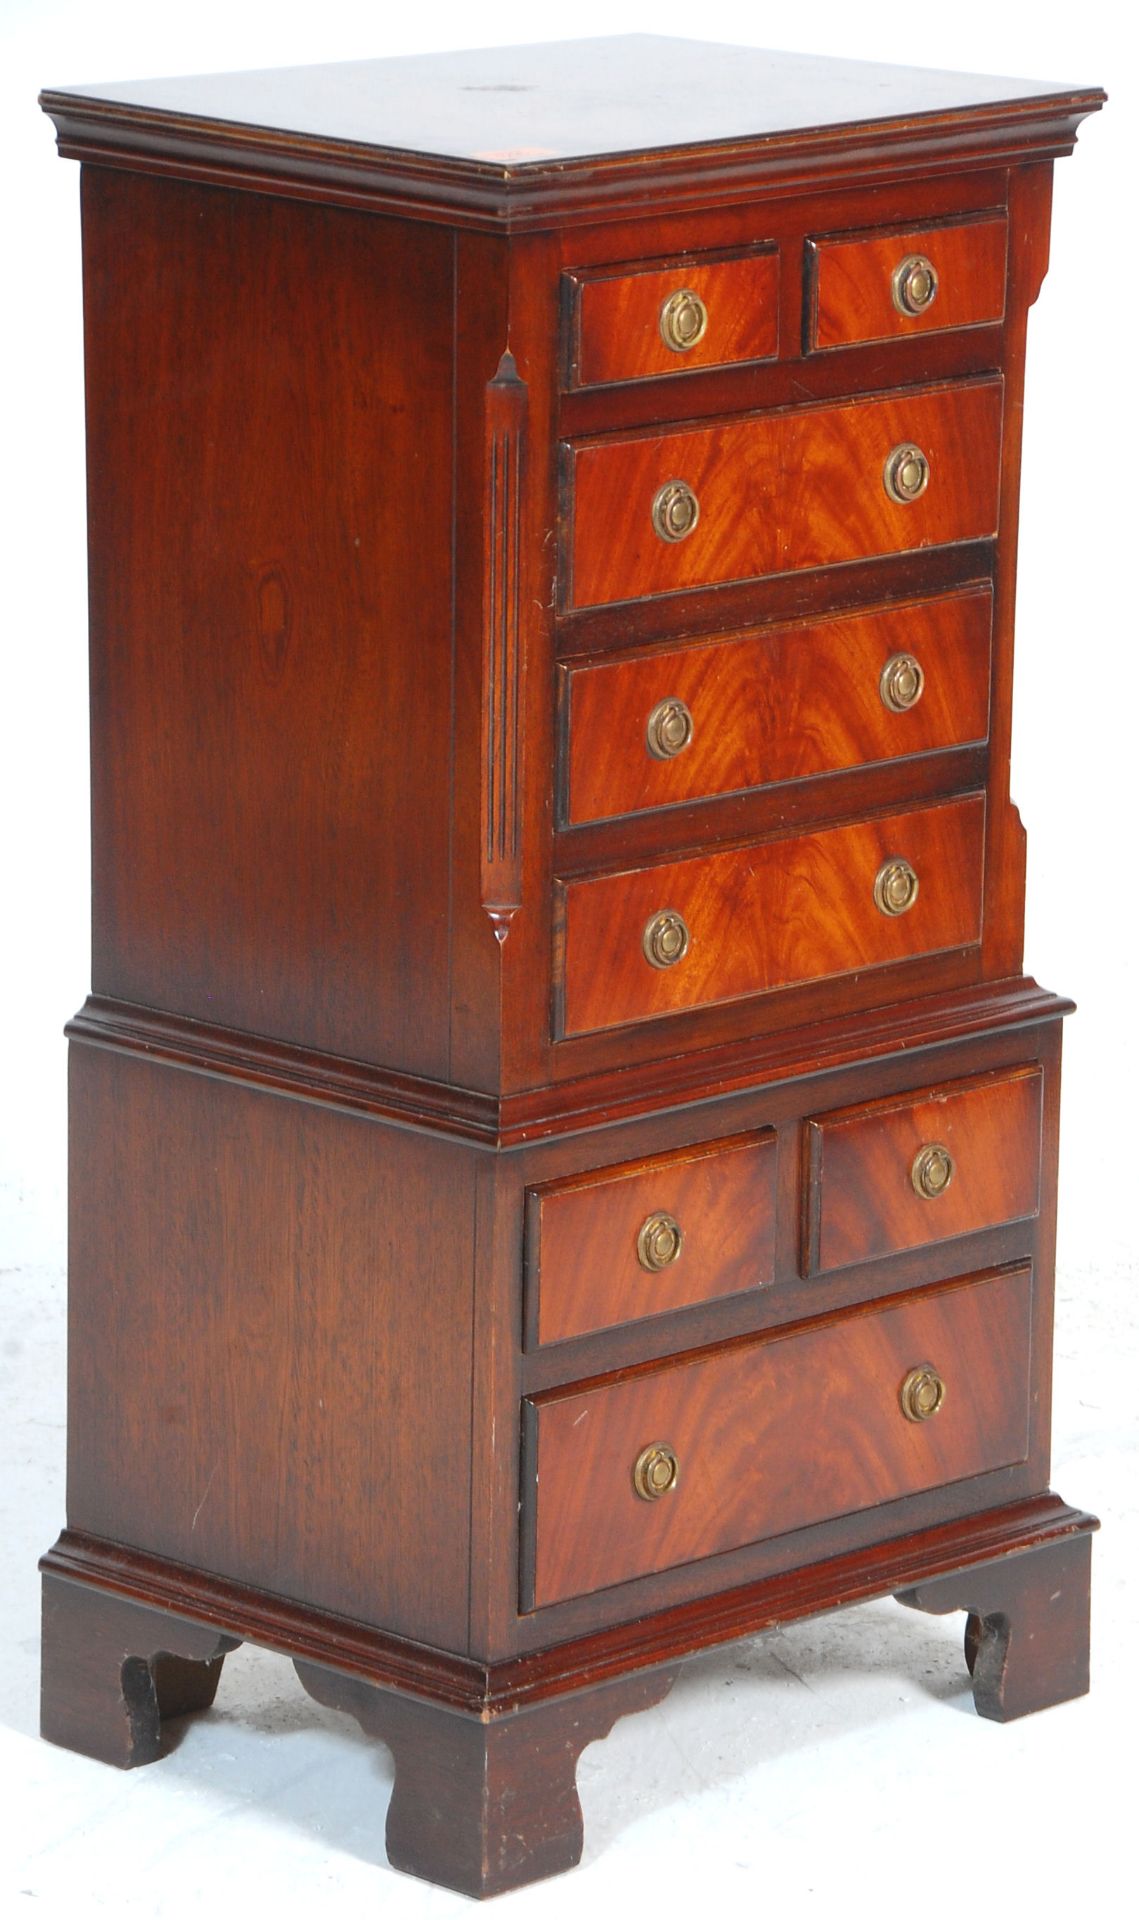 A Georgian revival small mahogany tallboy chest of drawers raised on bracket feet with a series of